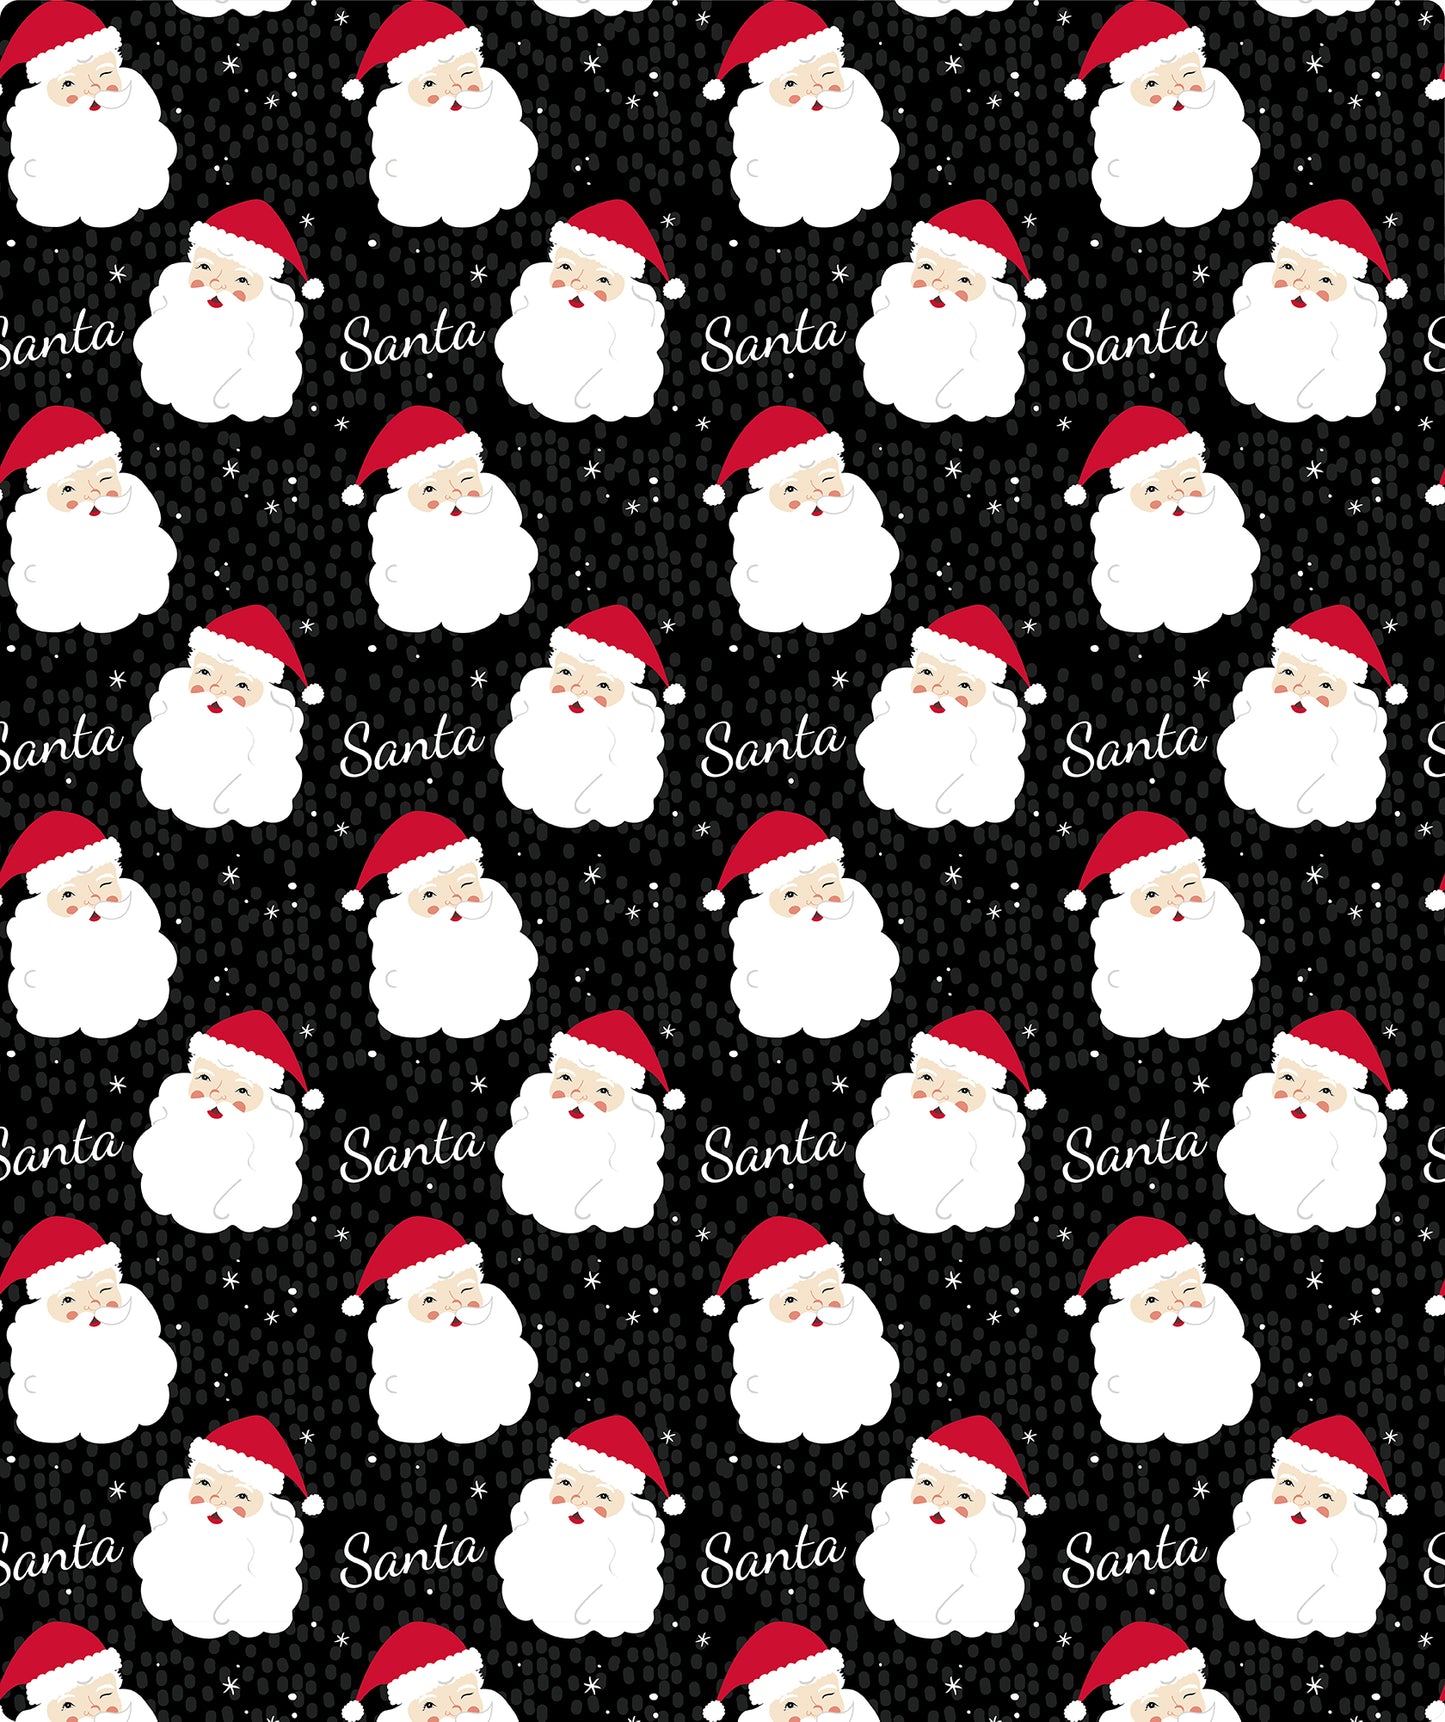 Black Winking Santa Foil Wrapping Paper Roll Wholesale Wrapholic